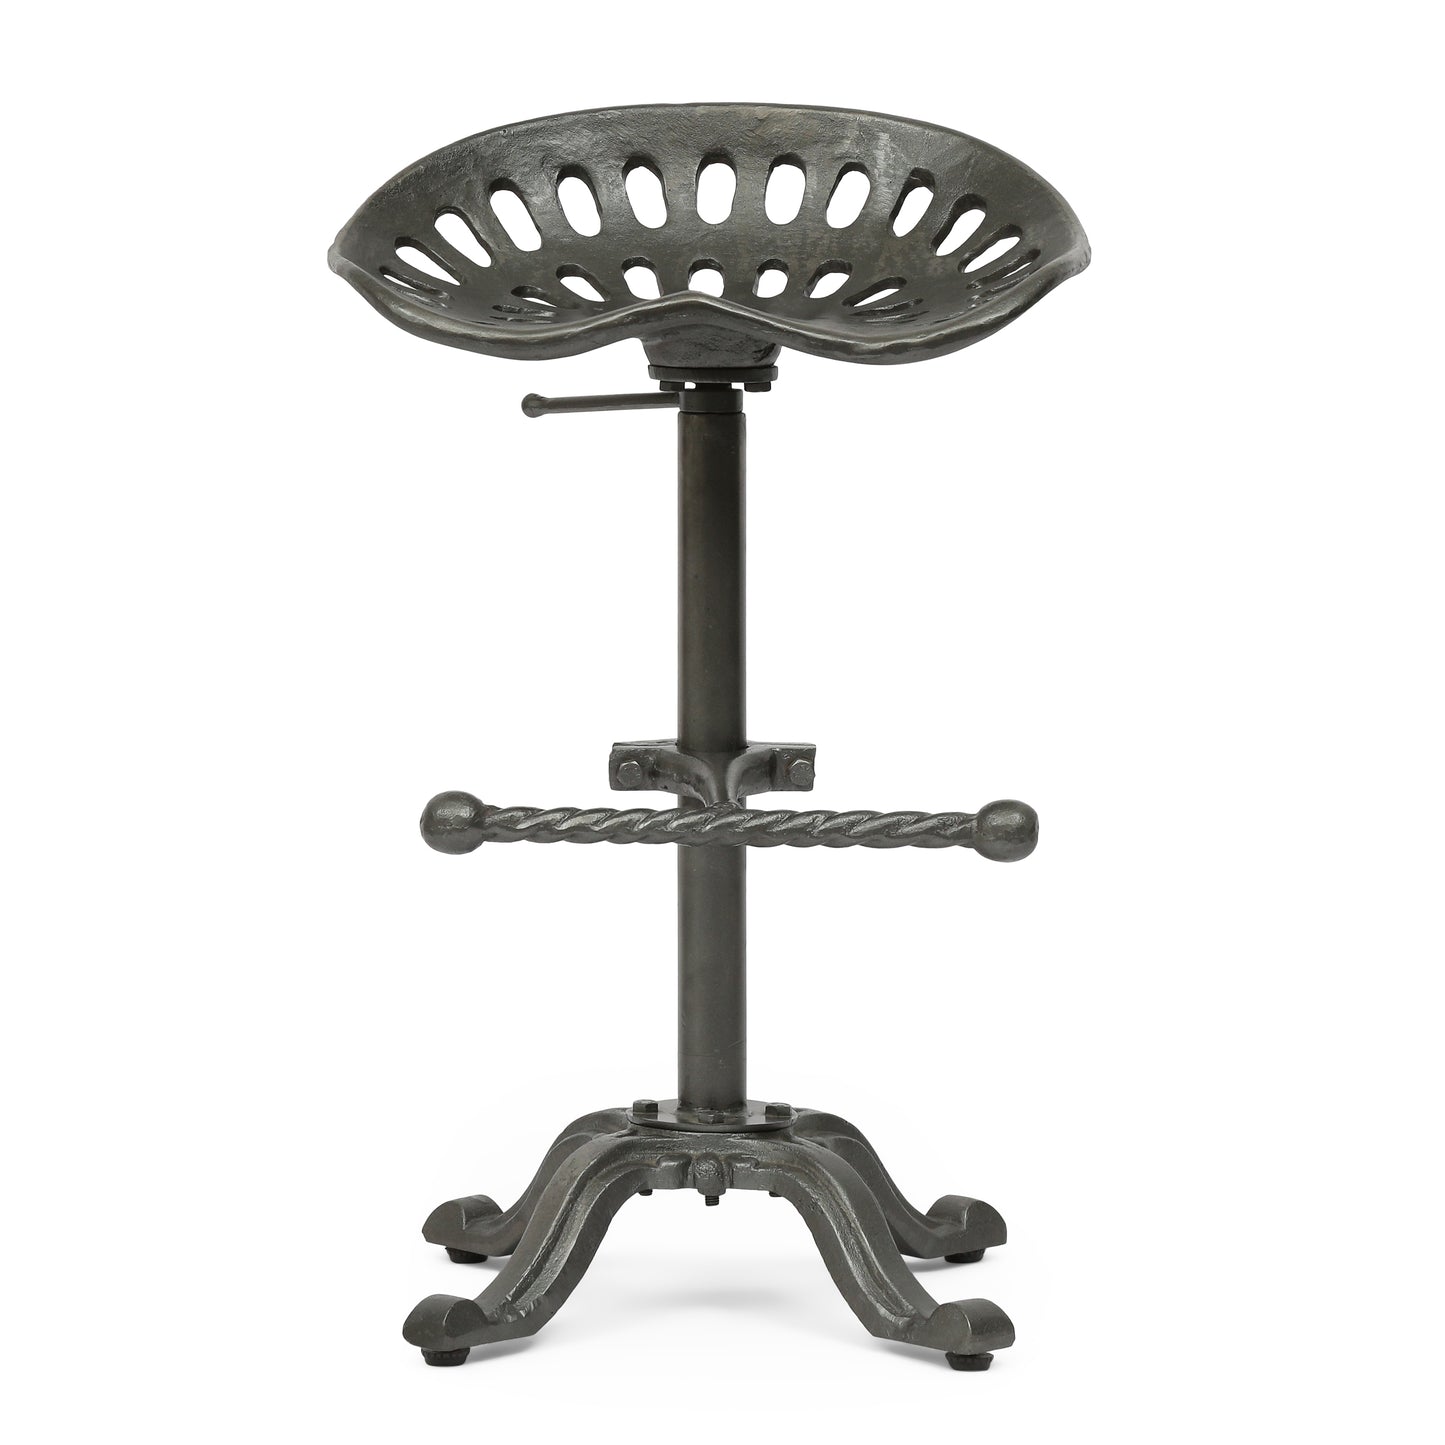 Laymon Industrial Handcrafted Cast Iron Saddle Seat Barstool